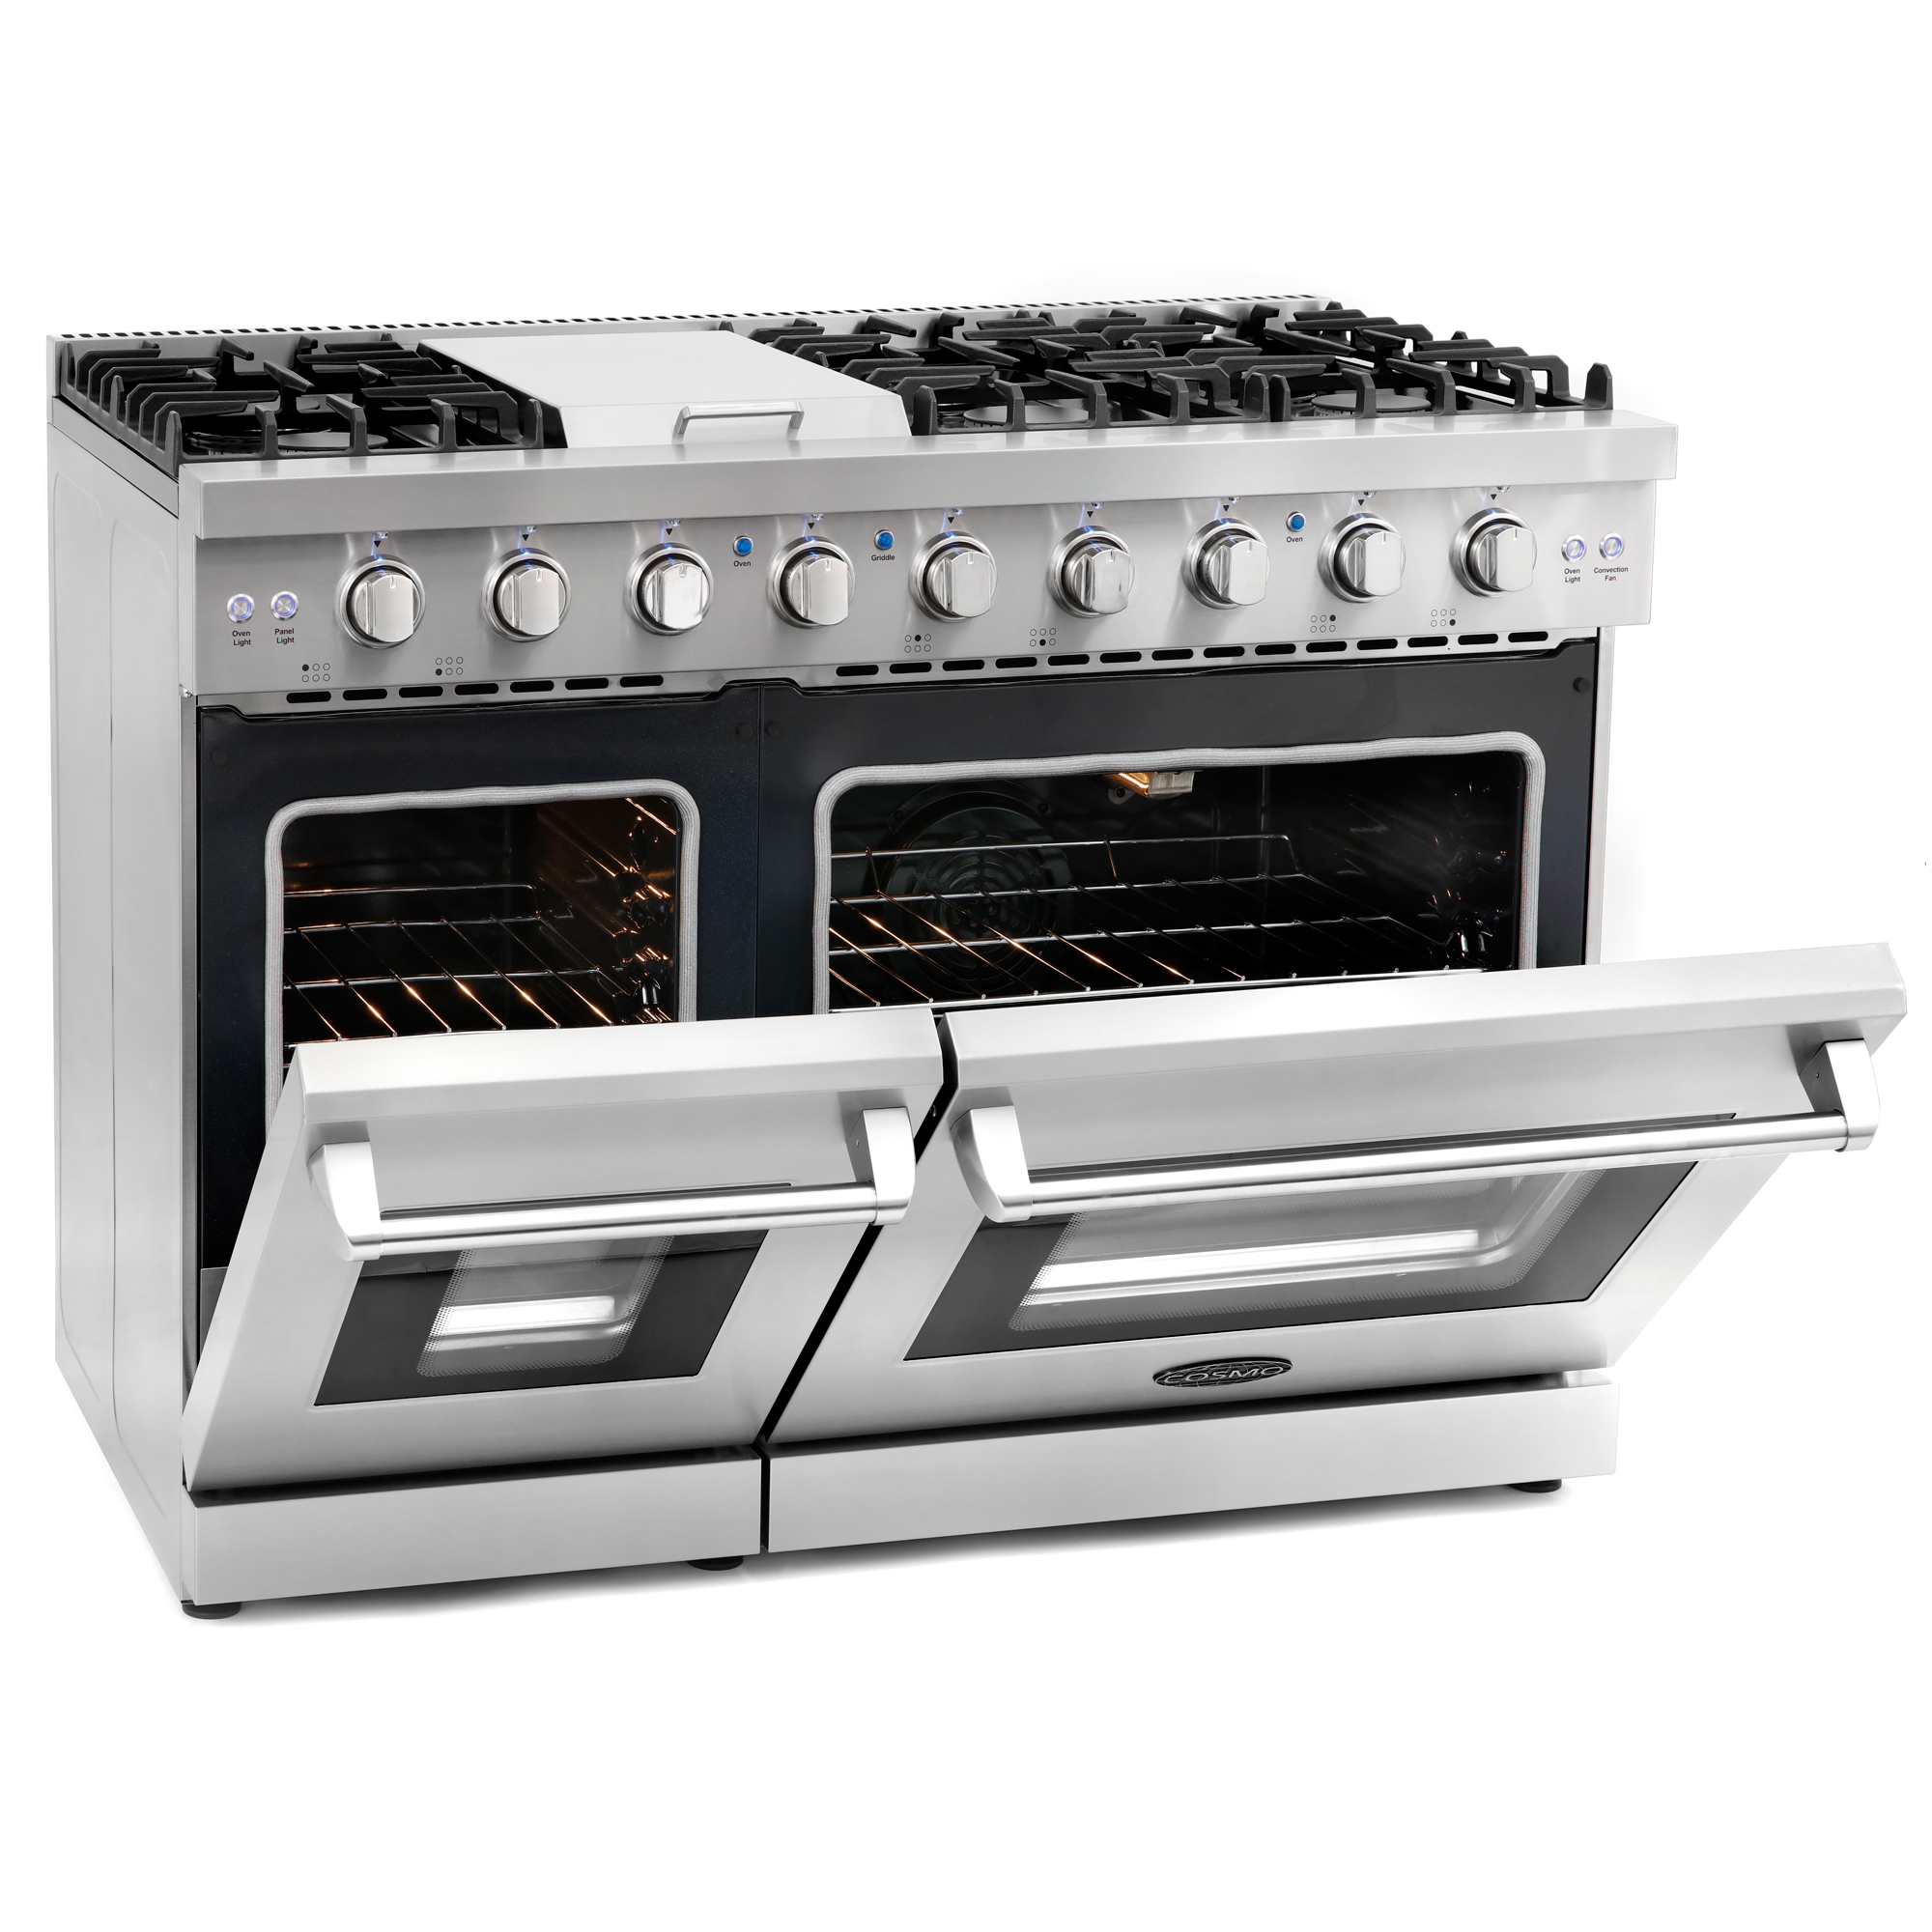 48 in. SlideIn Freestanding Double Oven Gas Range with 6 Italian Burners, Convection Oven